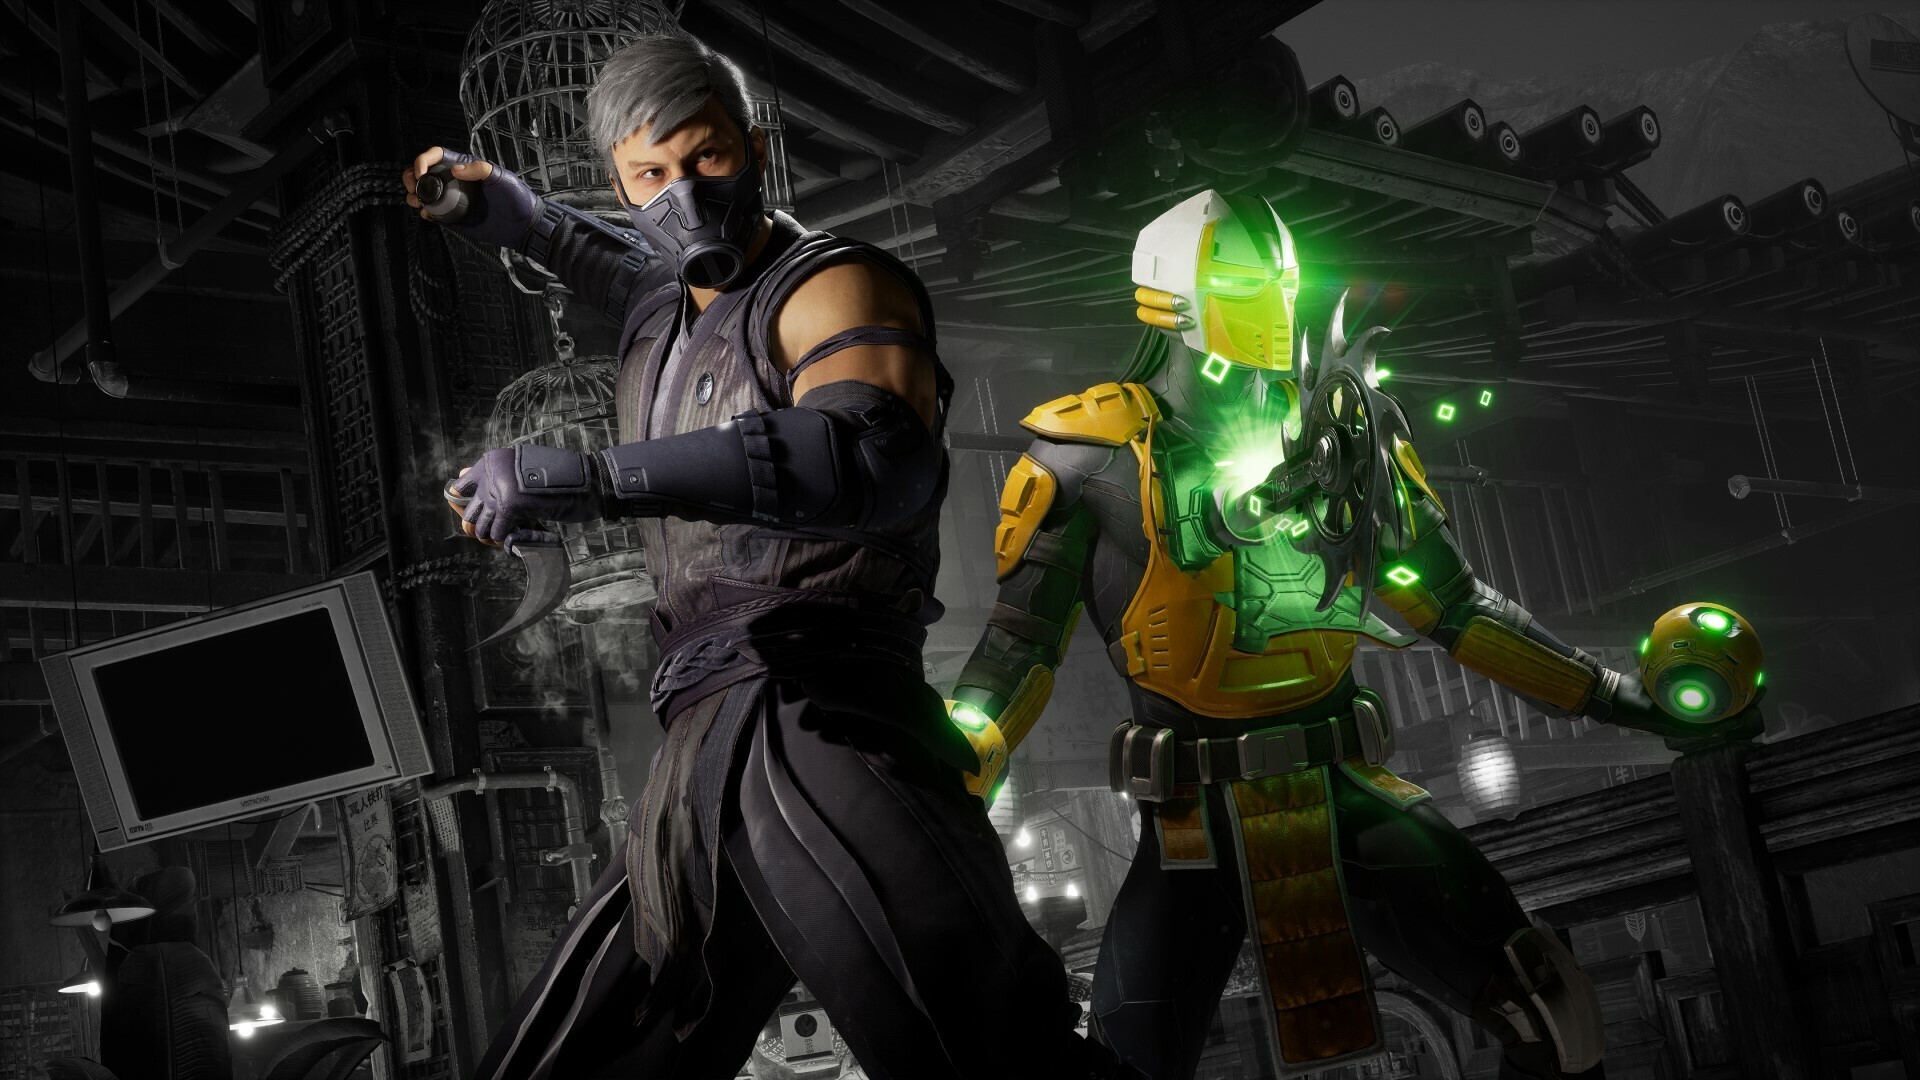 Mortal Kombat 1: How to unlock all characters & Kameo Fighters in MK1